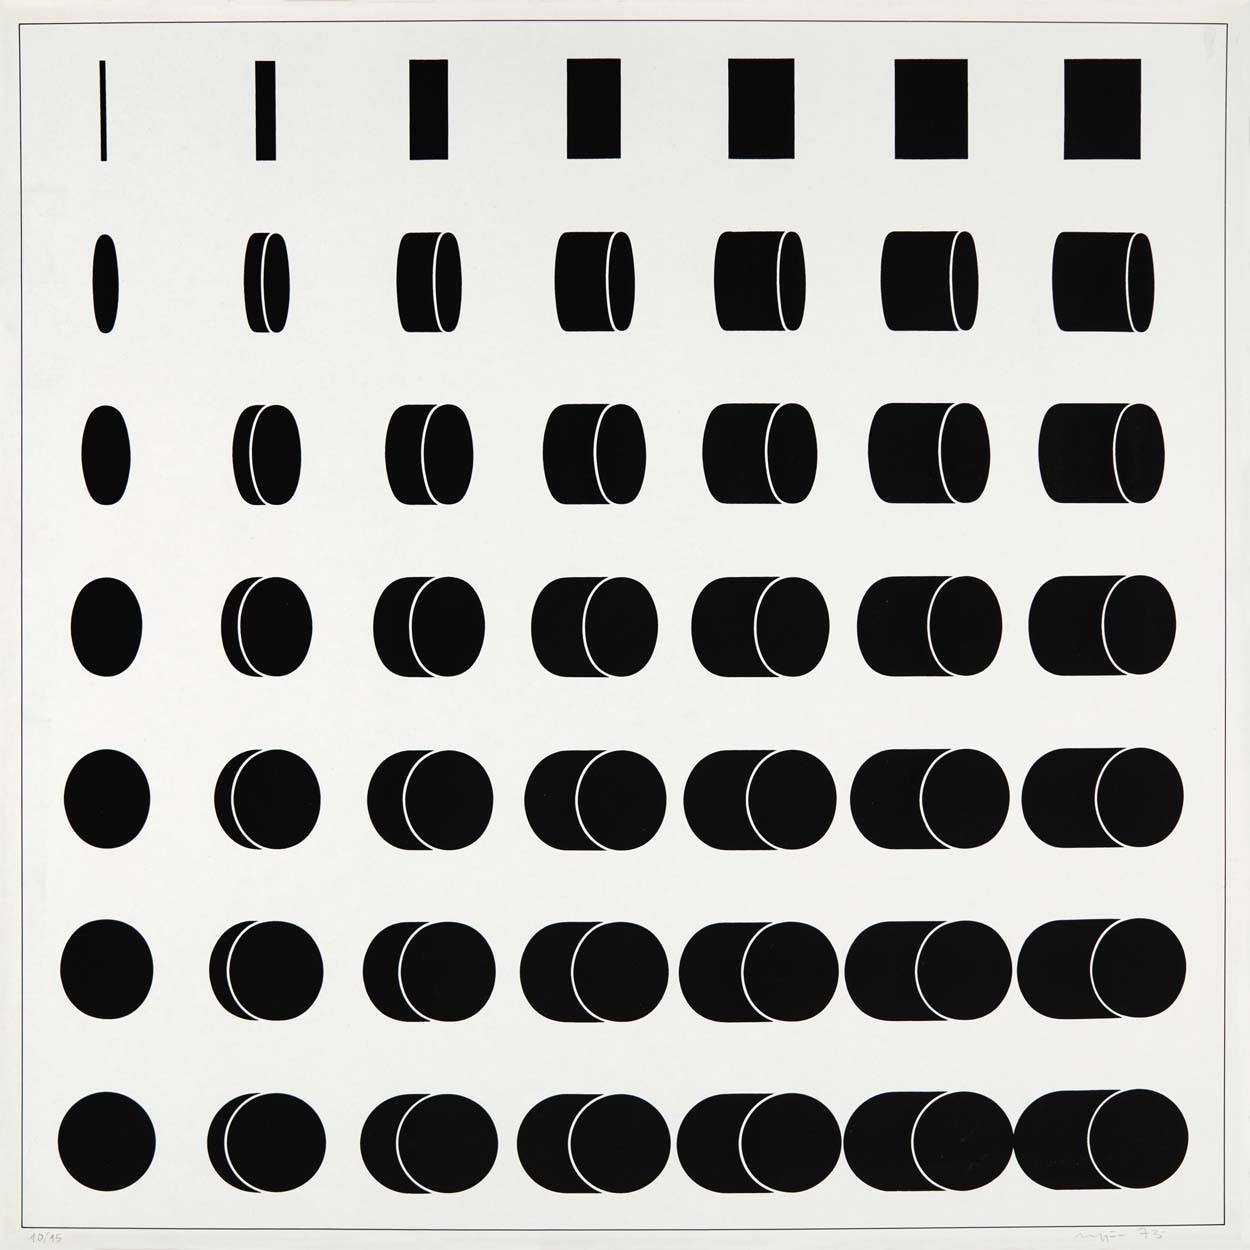 Mengyán András (1945) Logic of Forms (Planar Permutation of a Circle Unit without Repetition), 1973